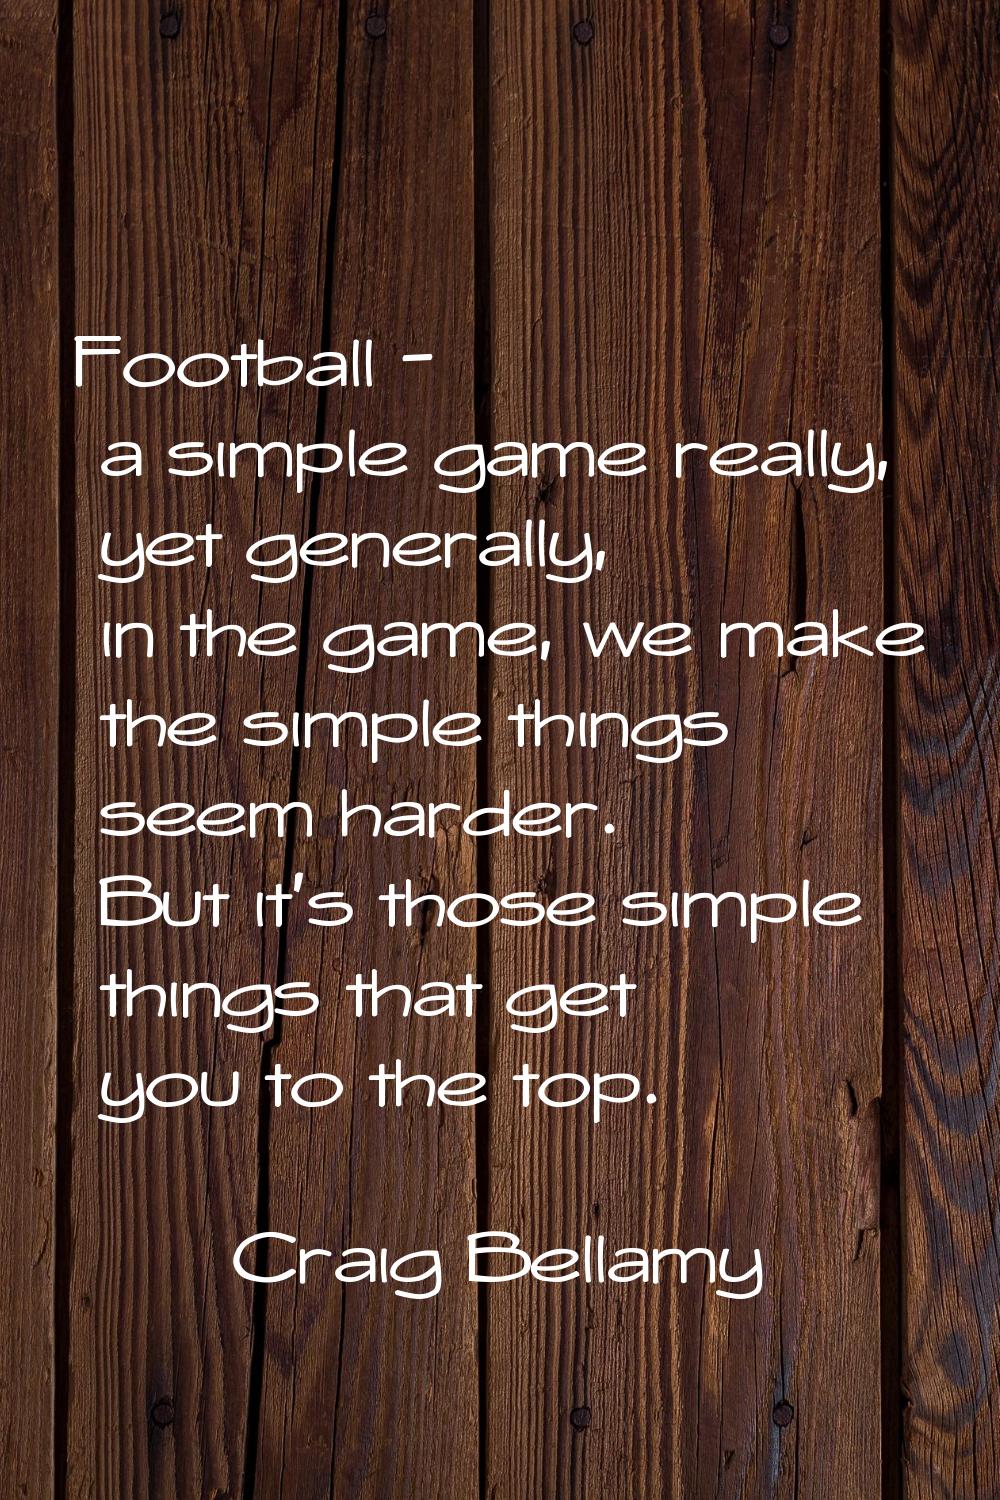 Football - a simple game really, yet generally, in the game, we make the simple things seem harder.